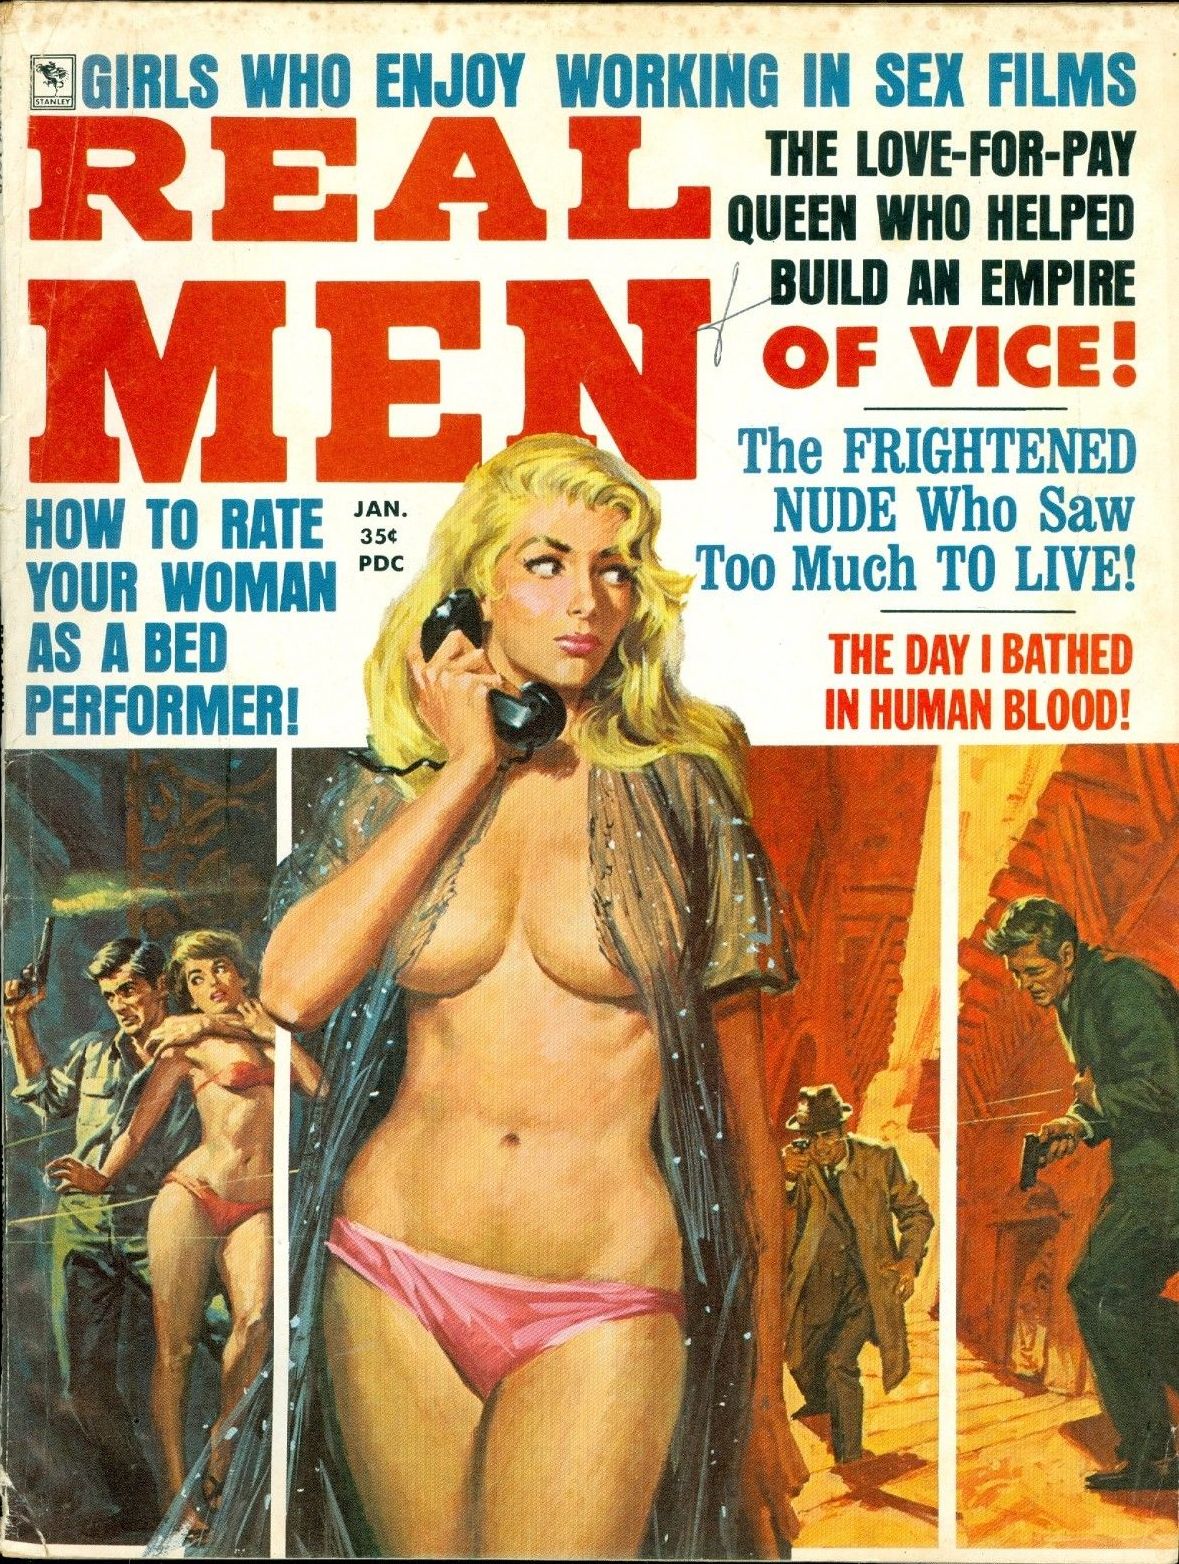 The Frightened Nude Who Saw Too Much To Live! -- Pulp Covers